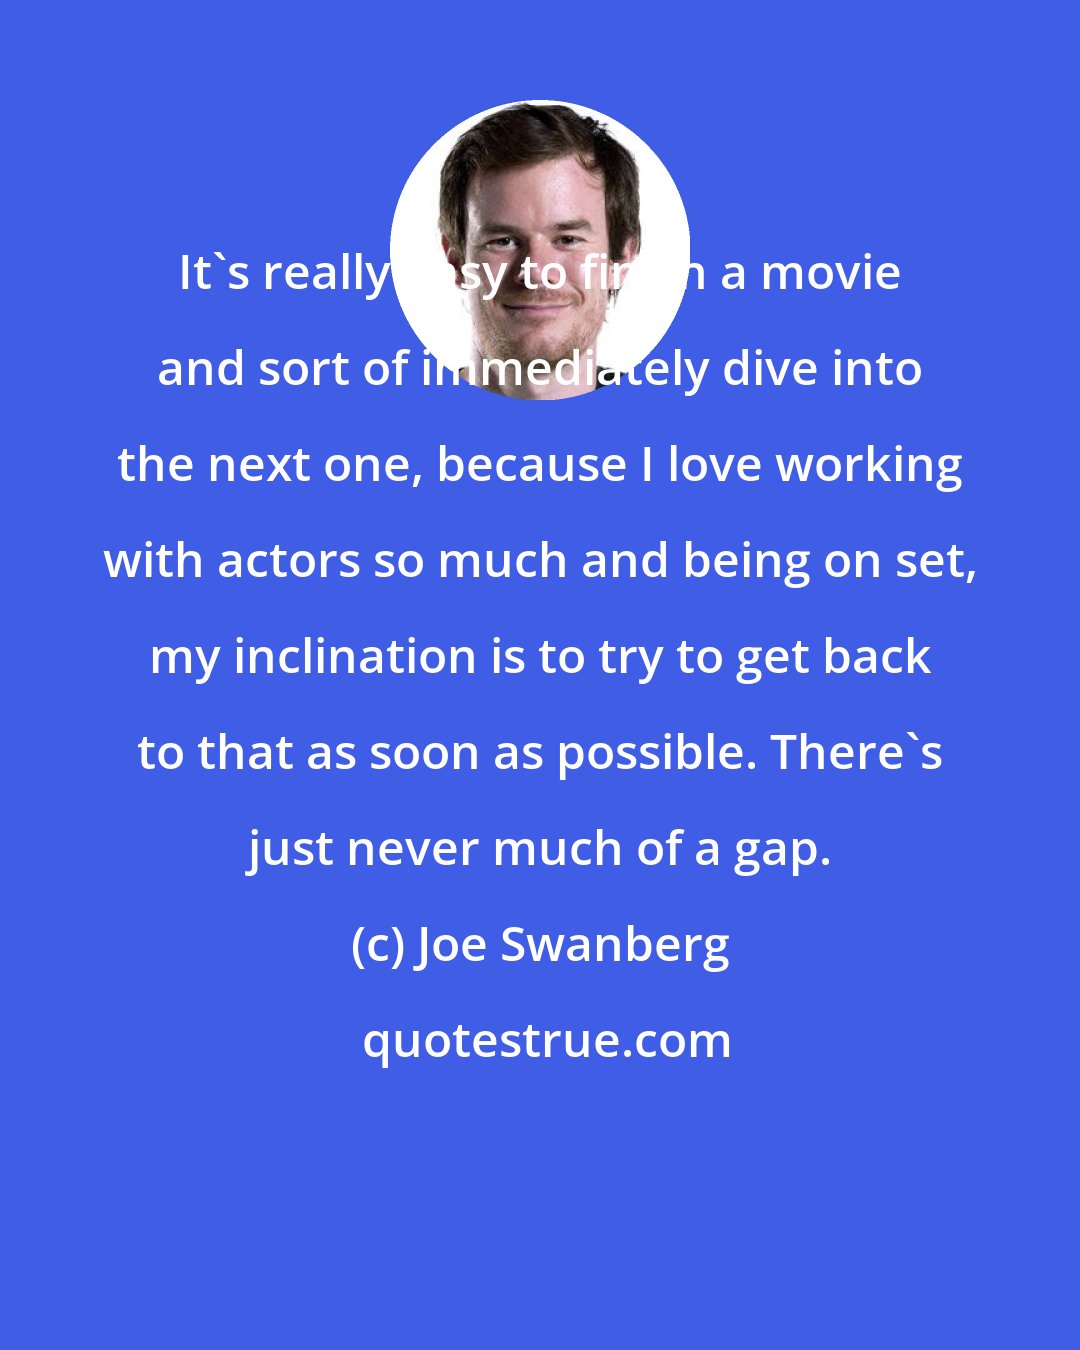 Joe Swanberg: It's really easy to finish a movie and sort of immediately dive into the next one, because I love working with actors so much and being on set, my inclination is to try to get back to that as soon as possible. There's just never much of a gap.